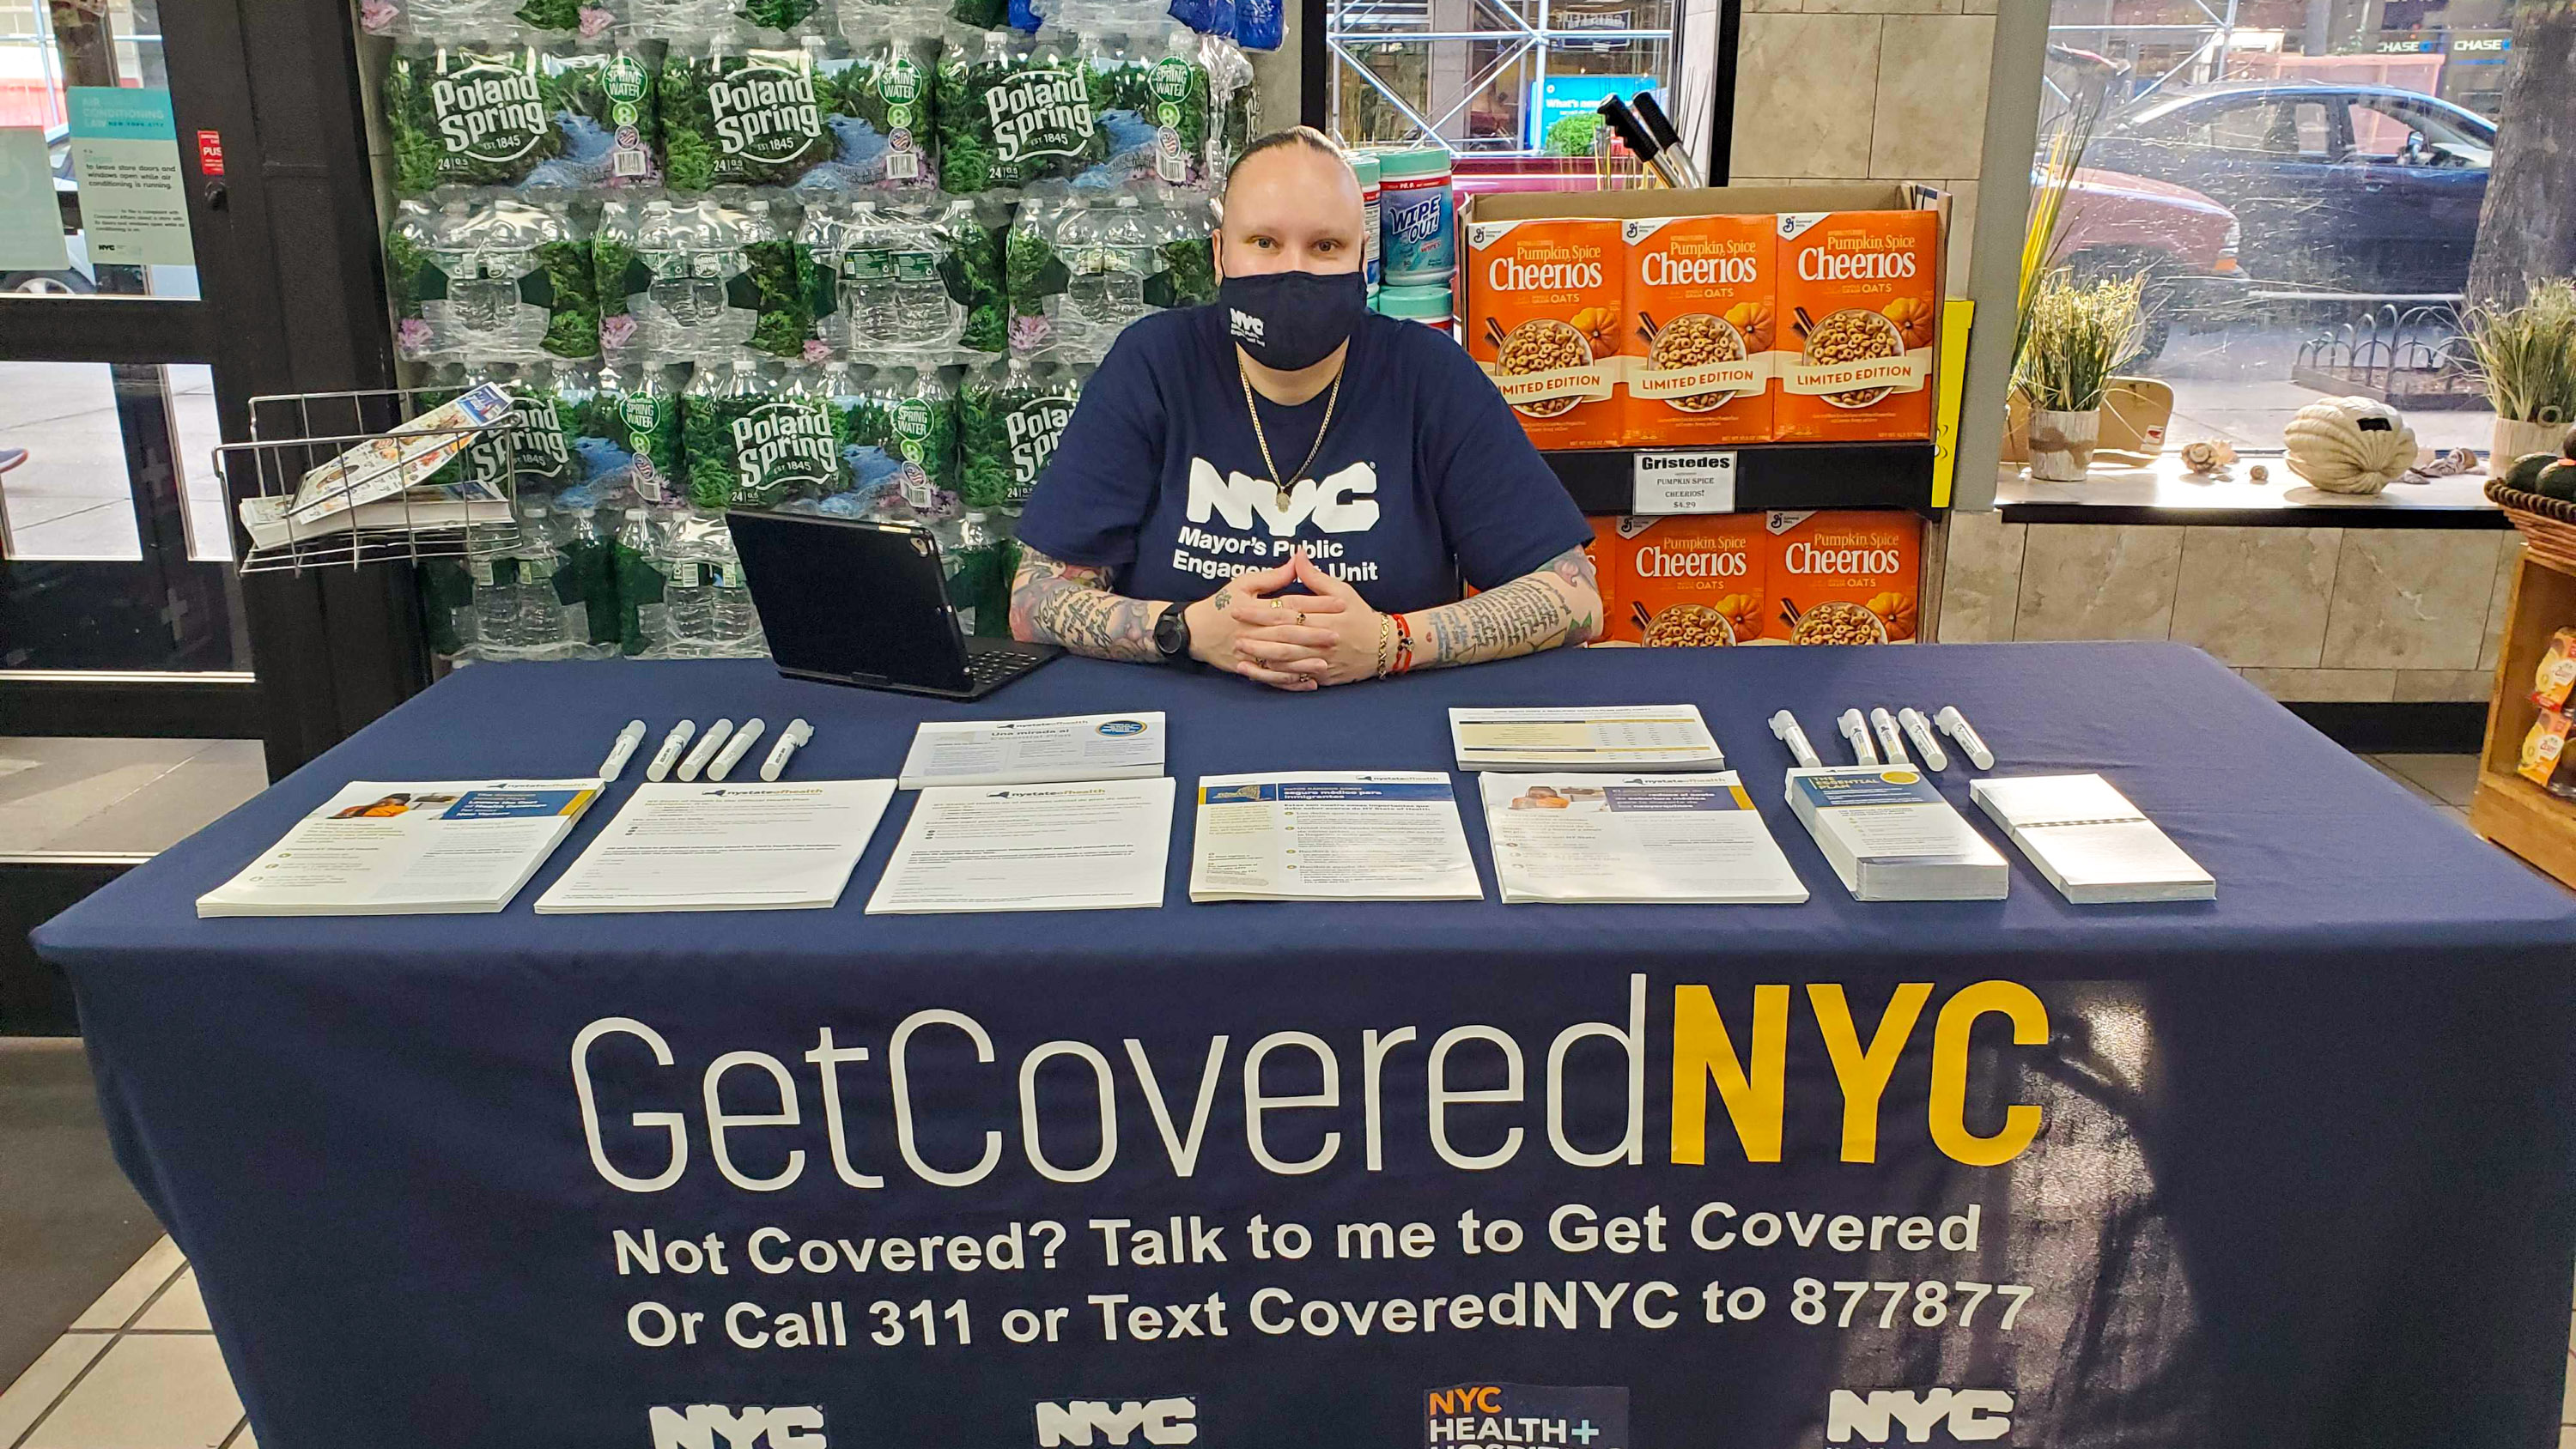 Jessica Ramgoolam sitting at a table with forms and a runner that reads "Get Covered NYC"